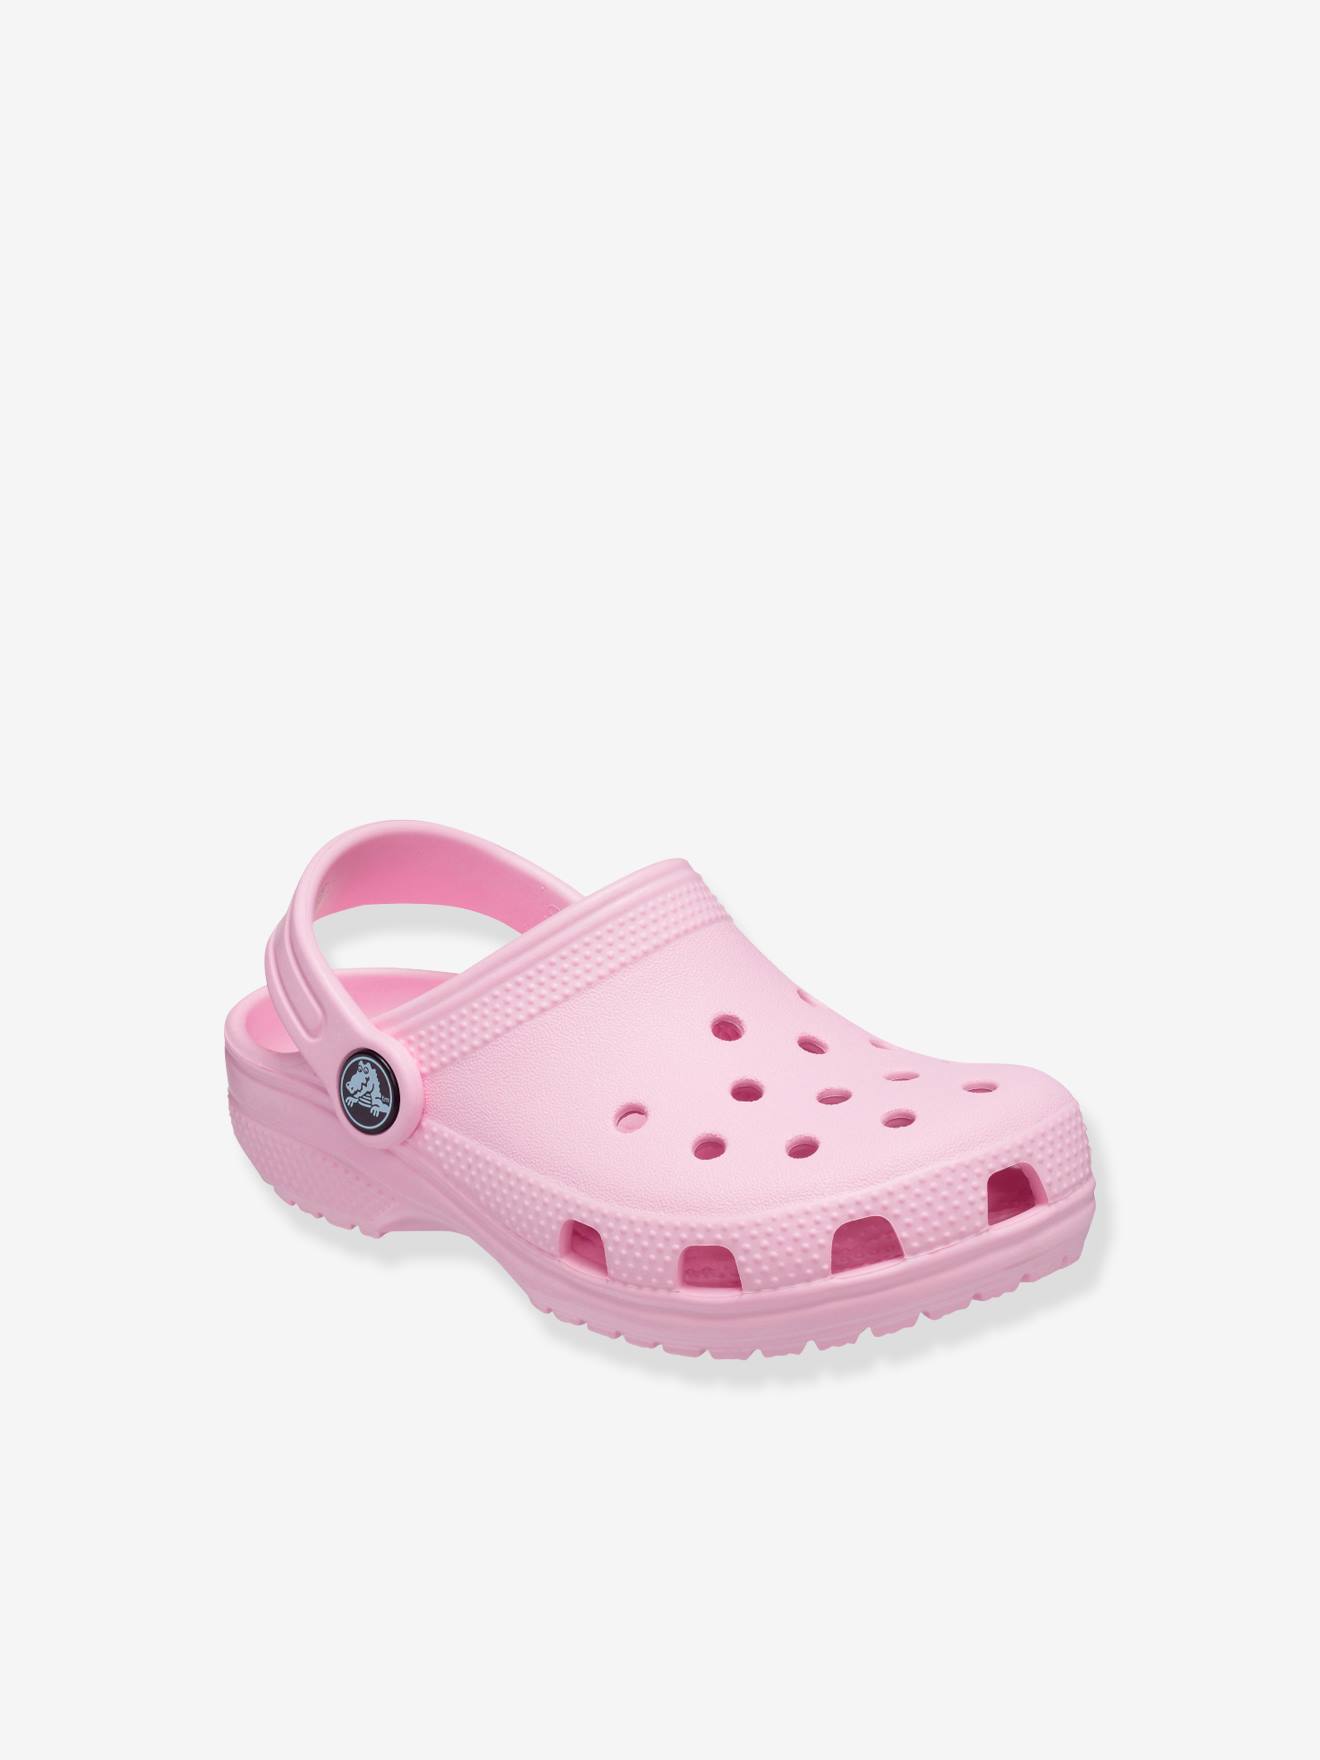 Classic Clog K for Kids, by CROCS(TM) pink light solid